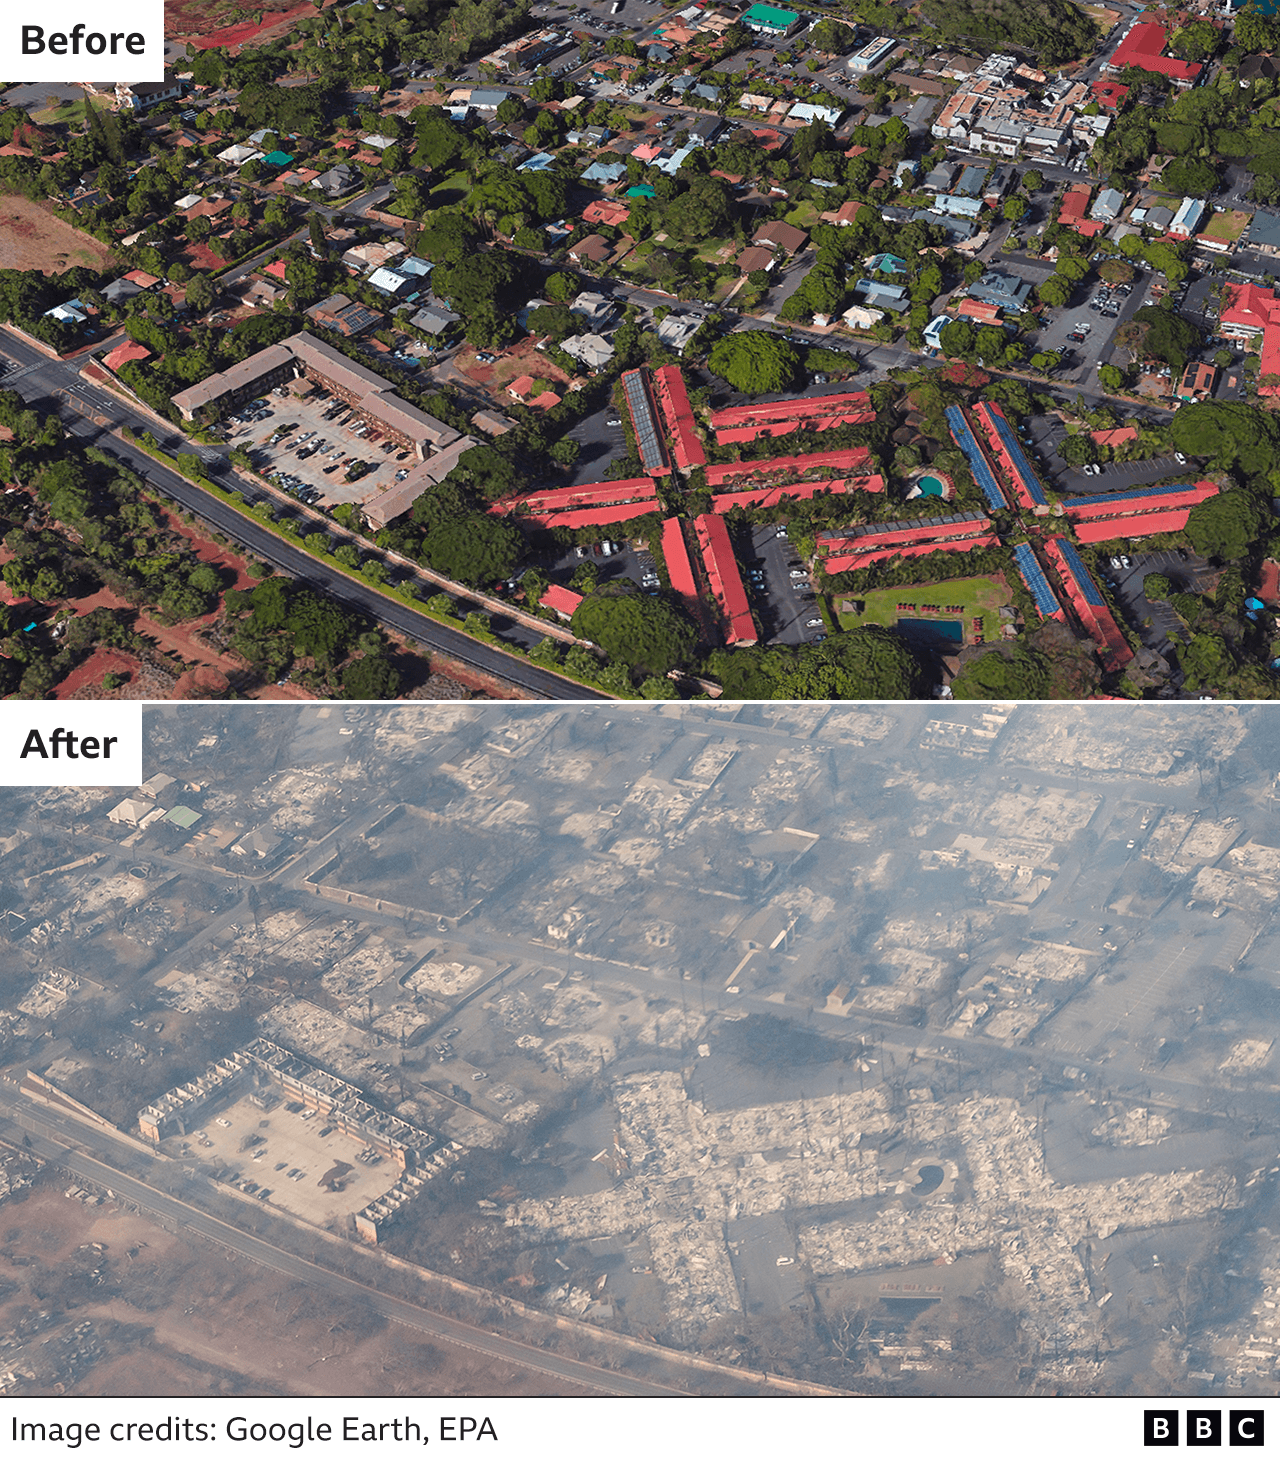 Hawaii fire: Maps and before and after images reveal Maui devastation ...